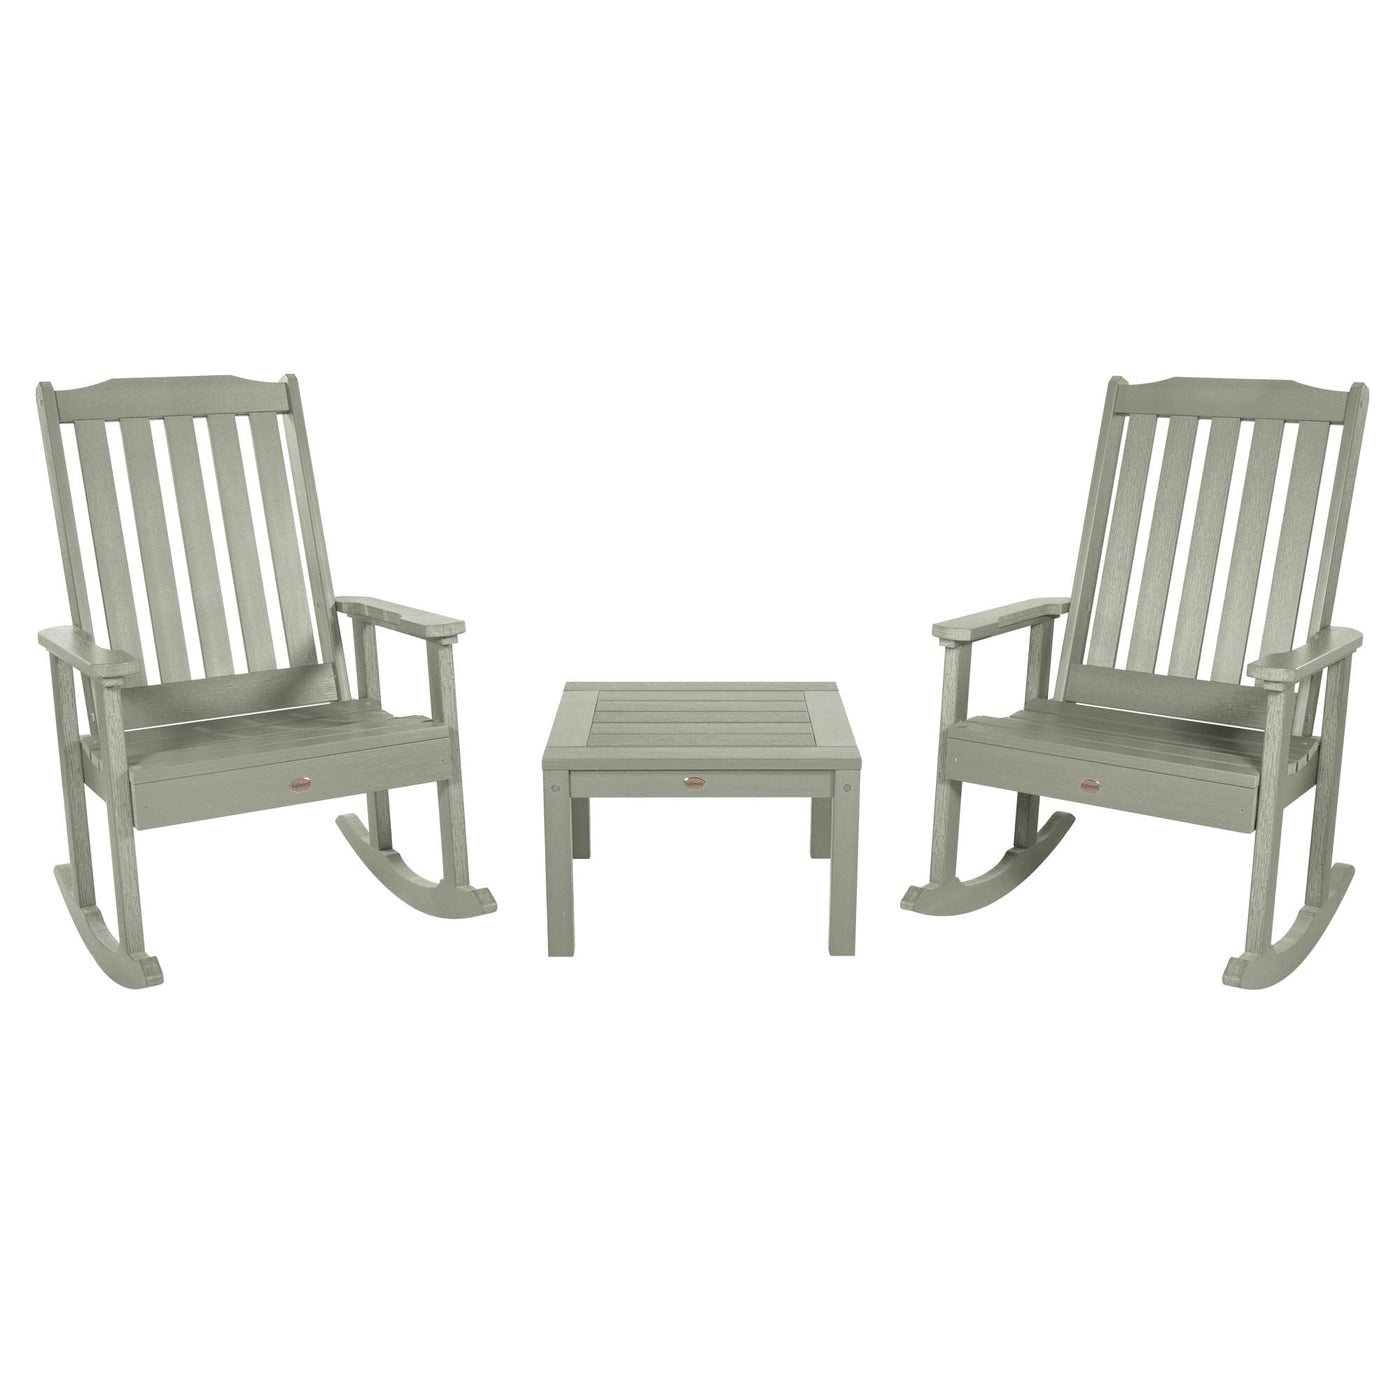 2 Lehigh Rocking Chairs with Adirondack Side Table Kitted Sets Highwood USA Eucalyptus 